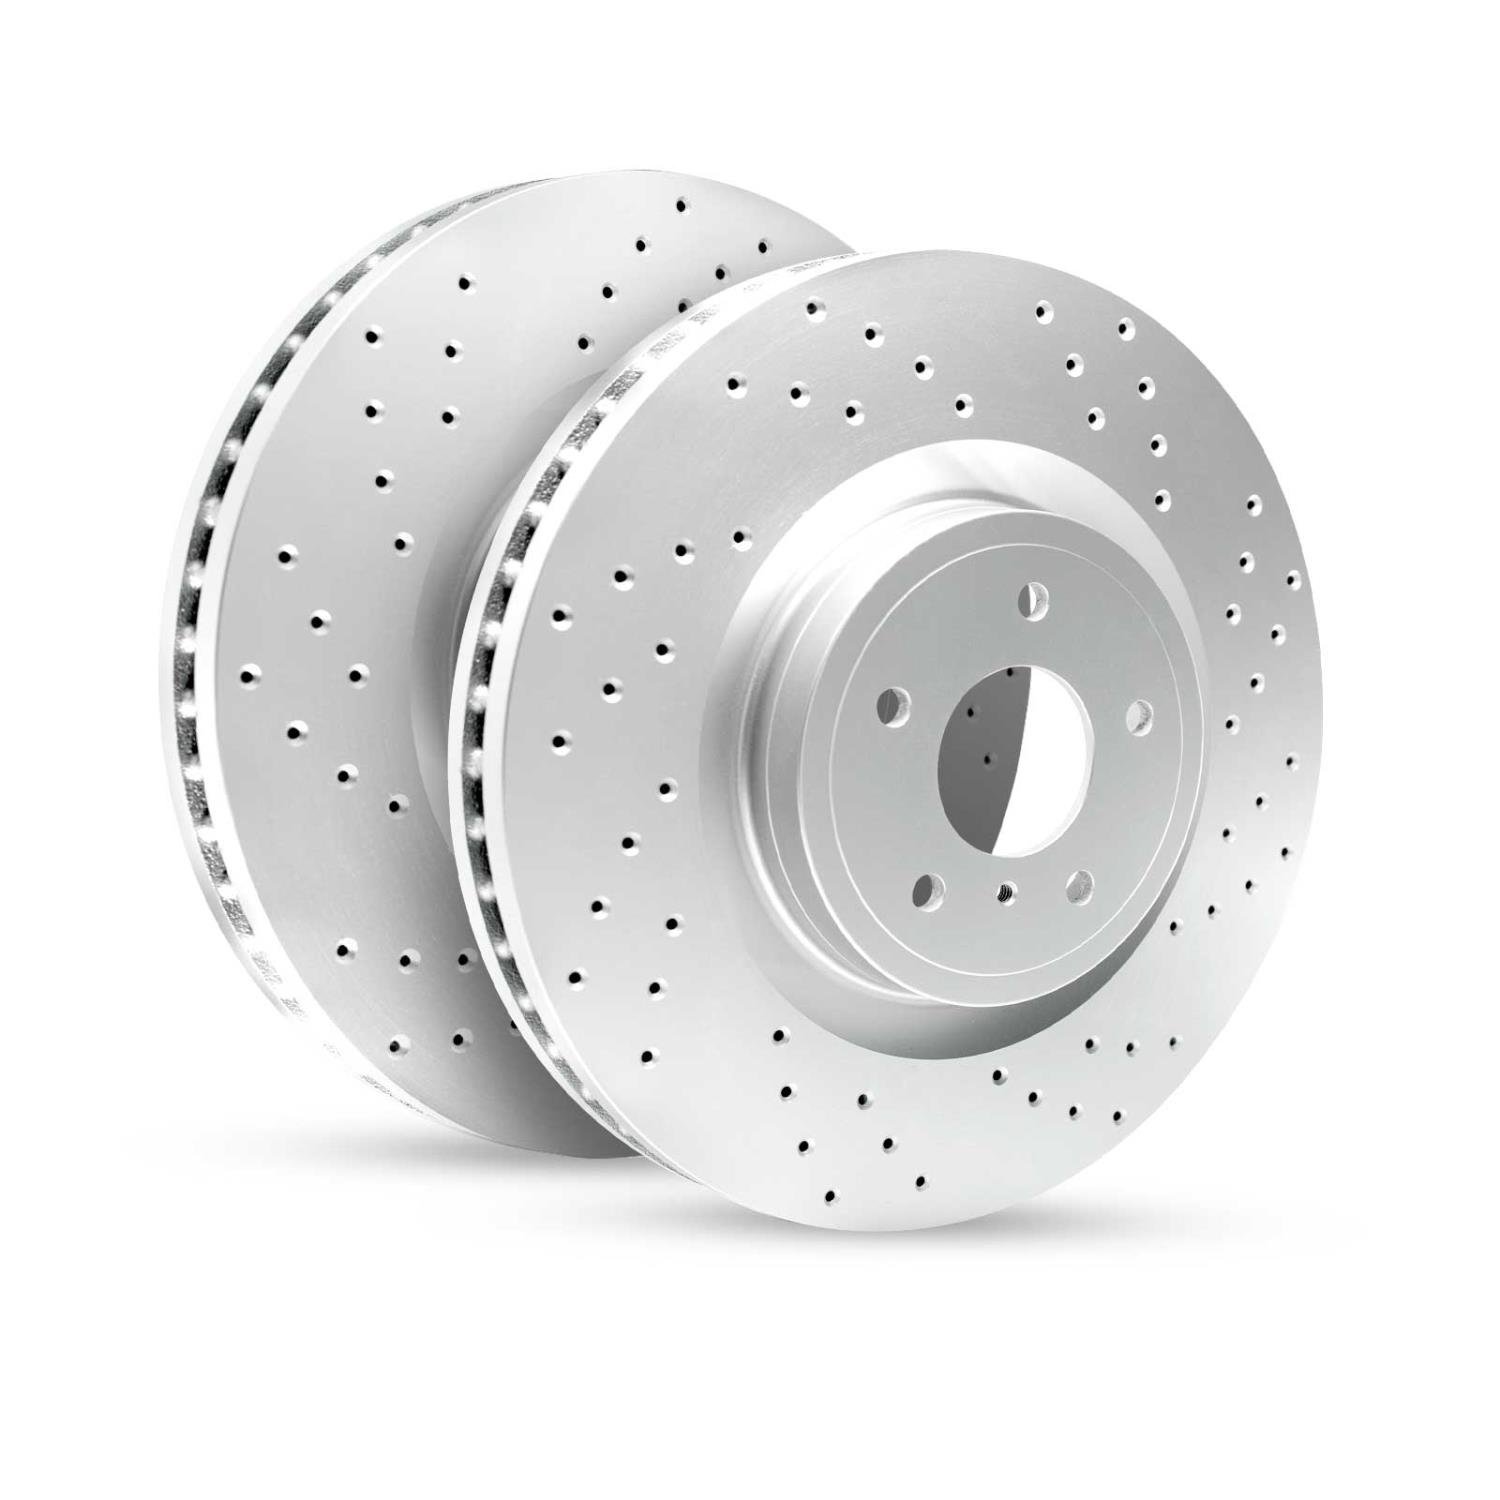 GEO-Carbon Drilled/Slotted Rotors, 1985-2002 Infiniti/Nissan,